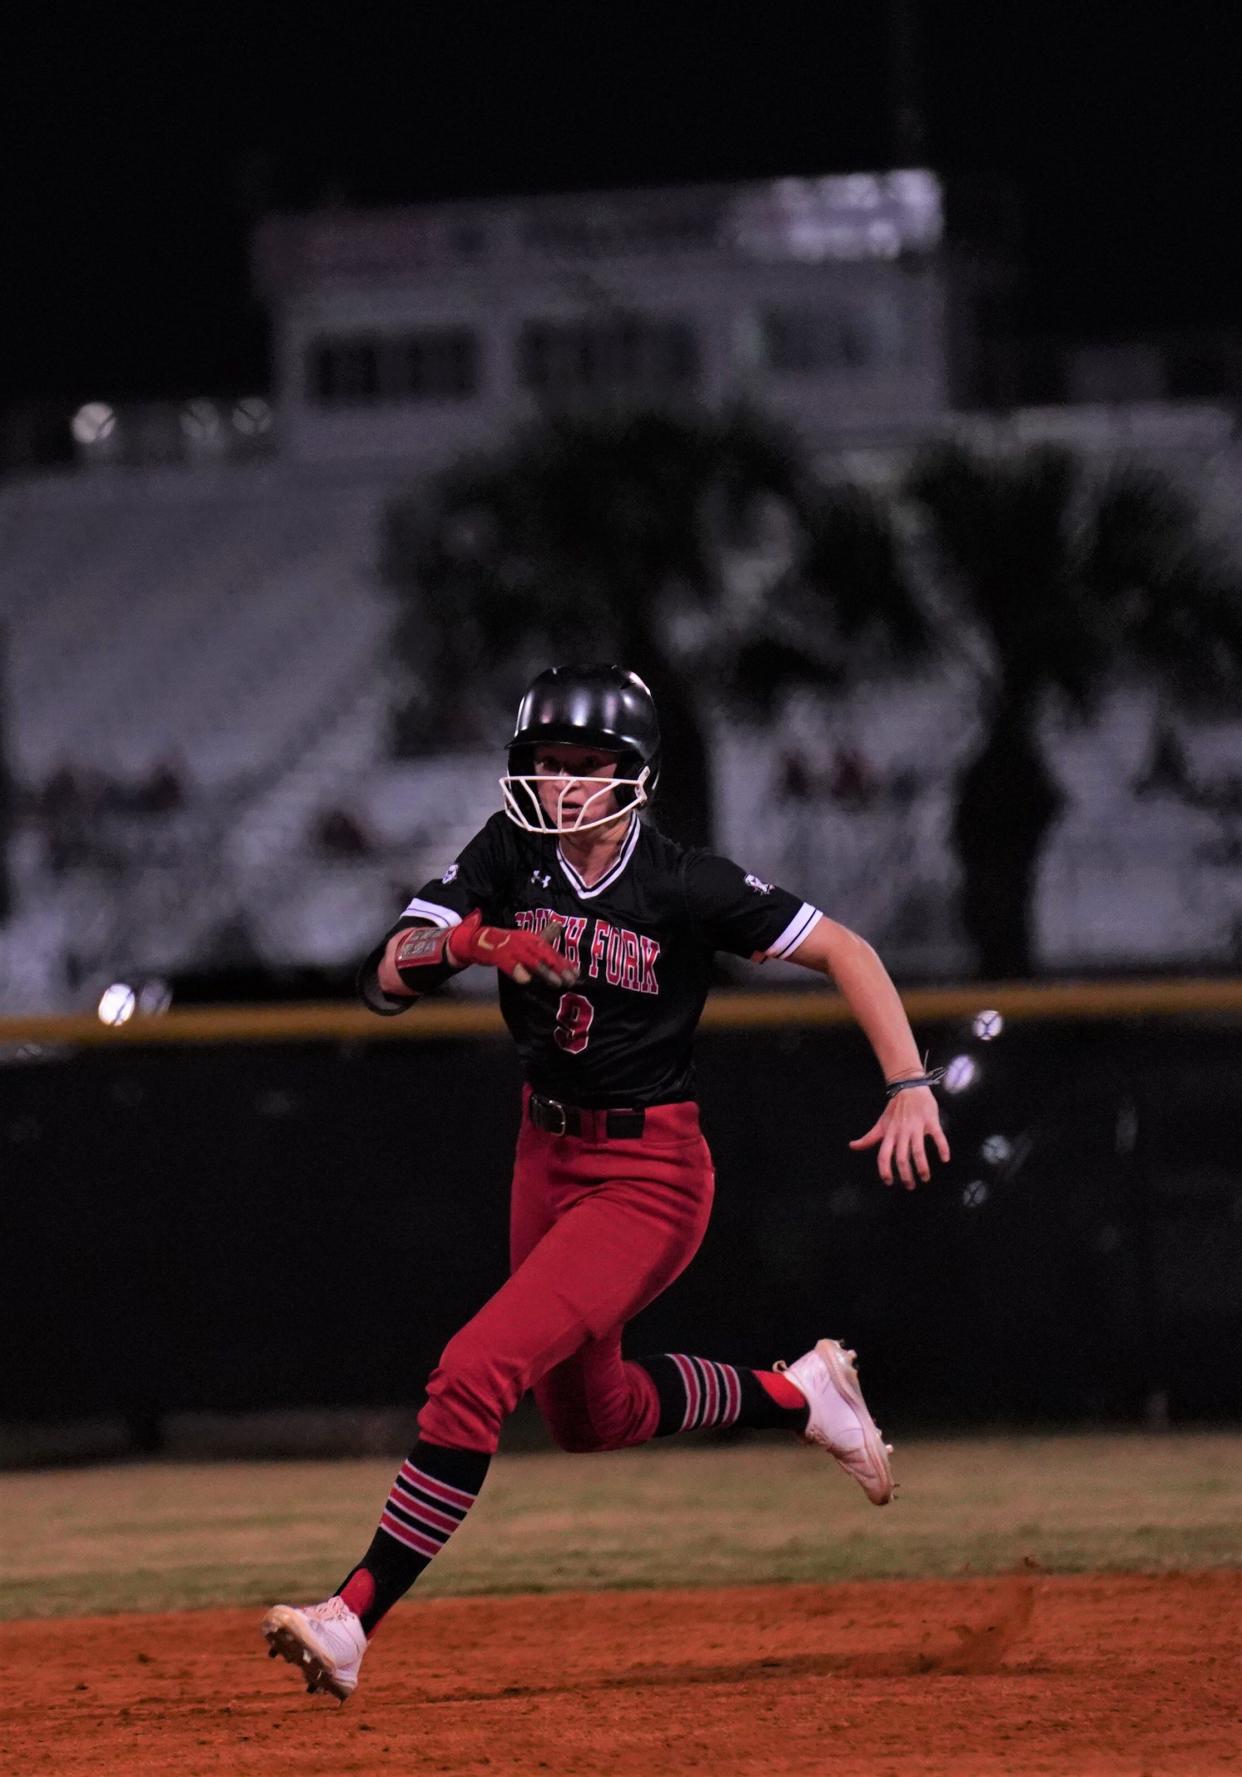 South Fork's Alice Dewaters races to third base after a triple in the fourth inning against Jensen Beach in a high school softball game on Friday, Feb. 24, 2023 in Jensen Beach. The Bulldogs won 8-5.